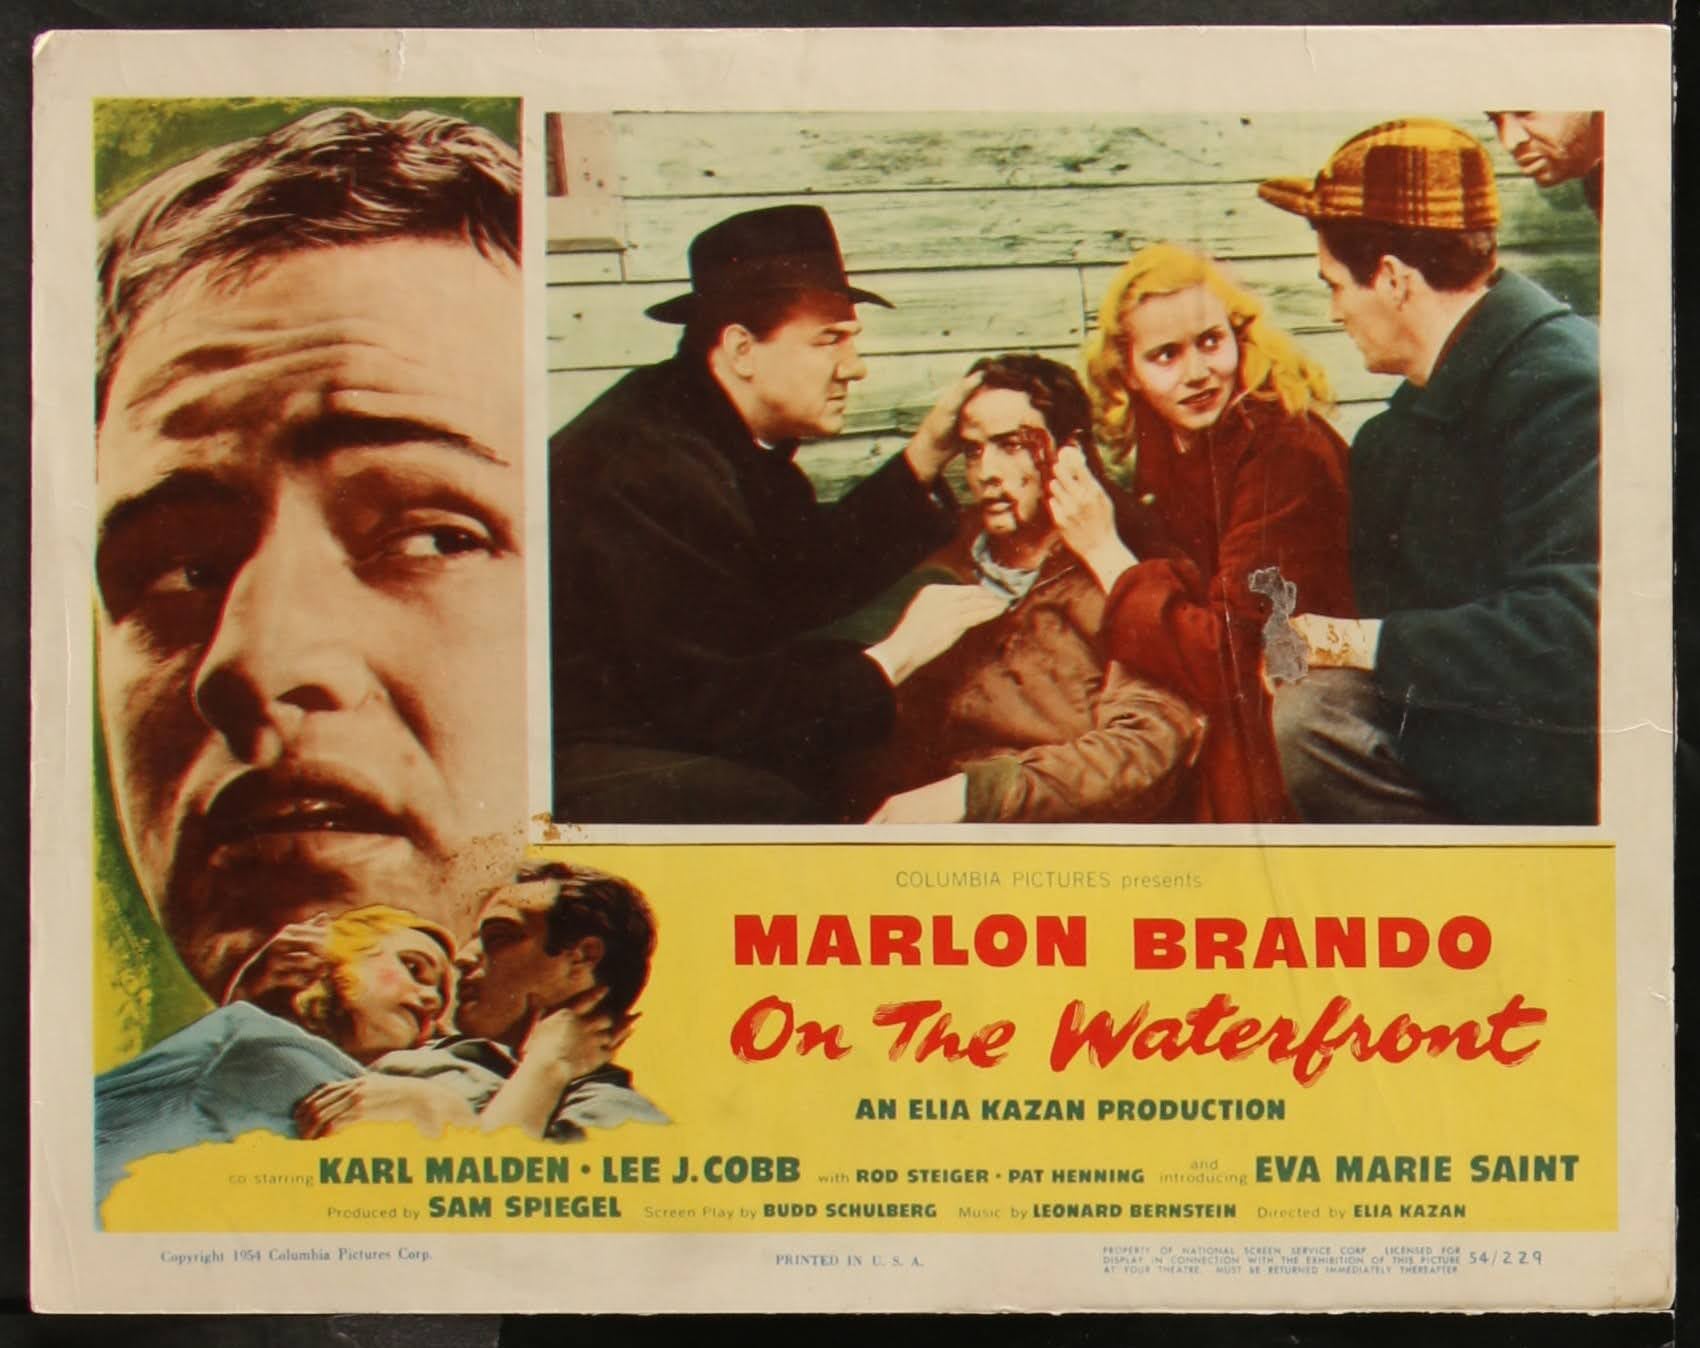 On The Waterfront US Lobby Card (1954) - ORIGINAL RELEASE - posterpalace.com